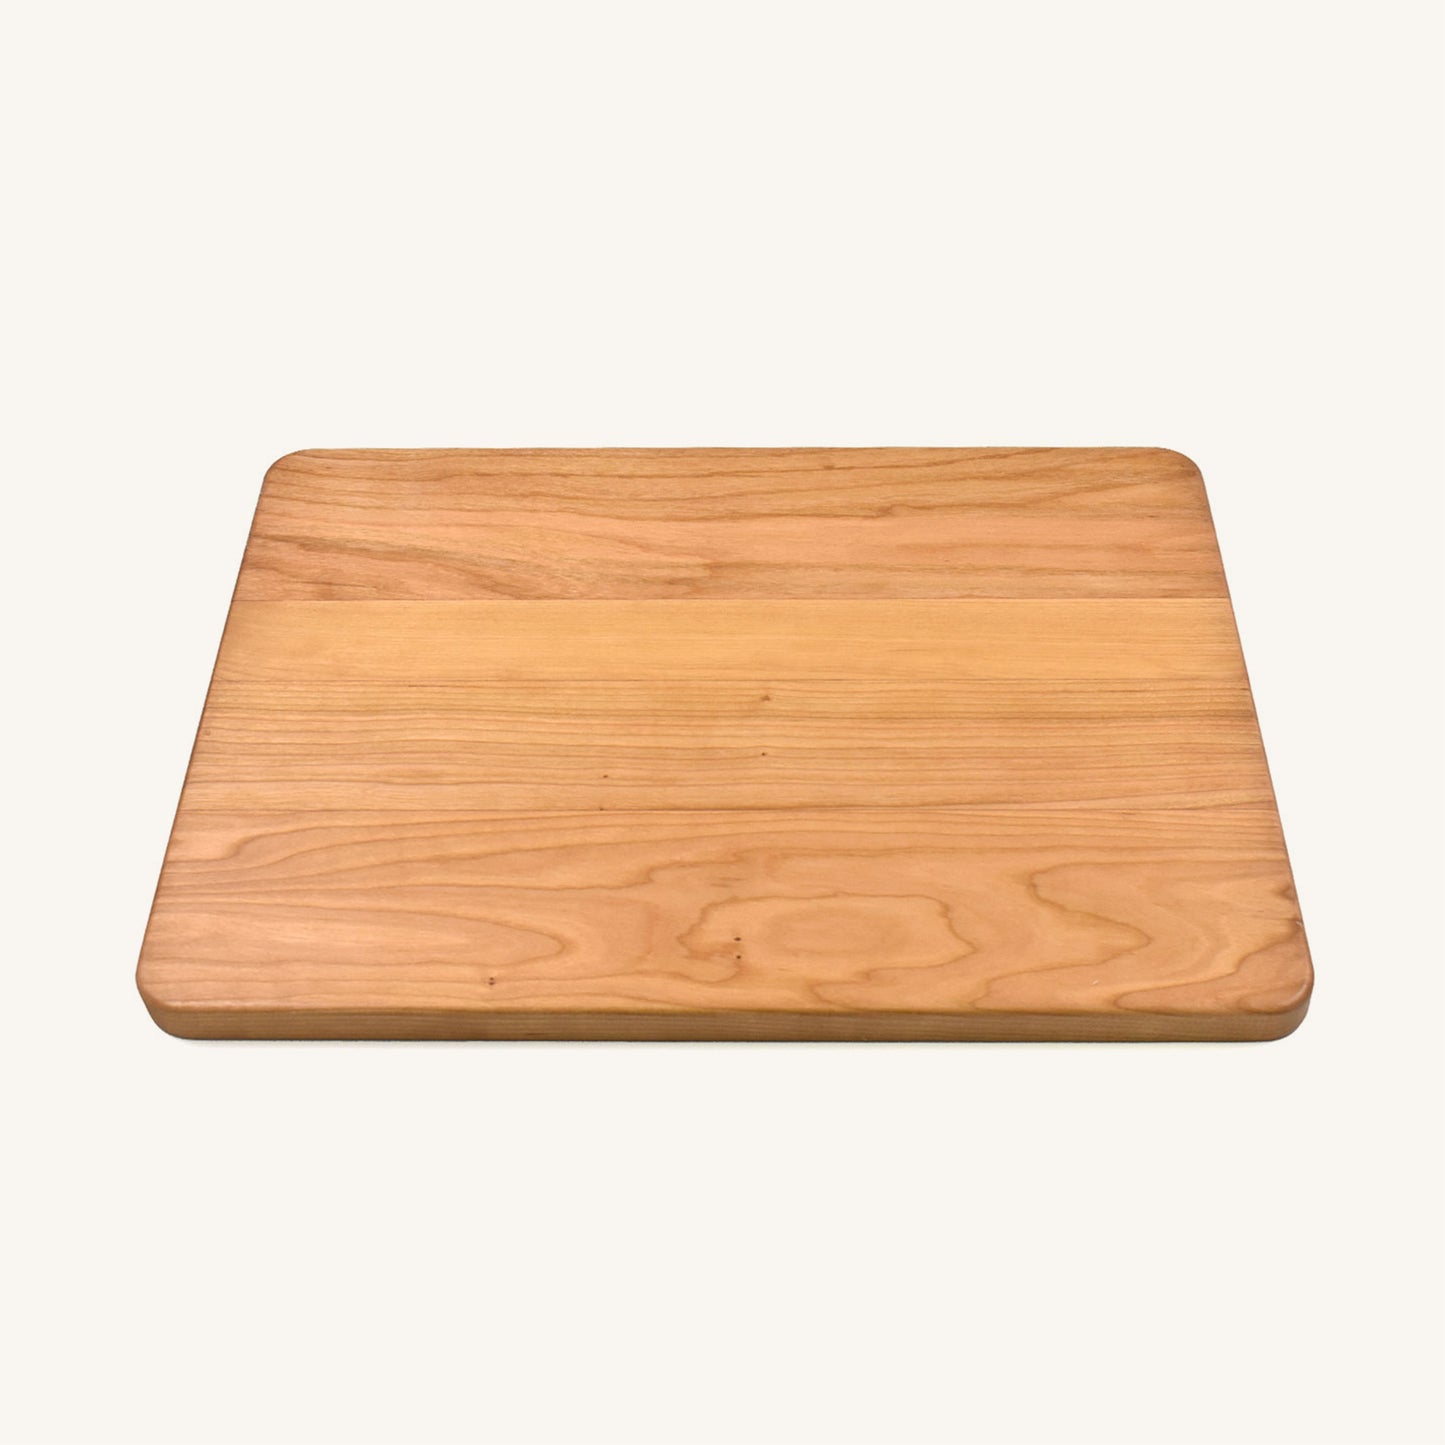 Cutting Board with Rounded Corners